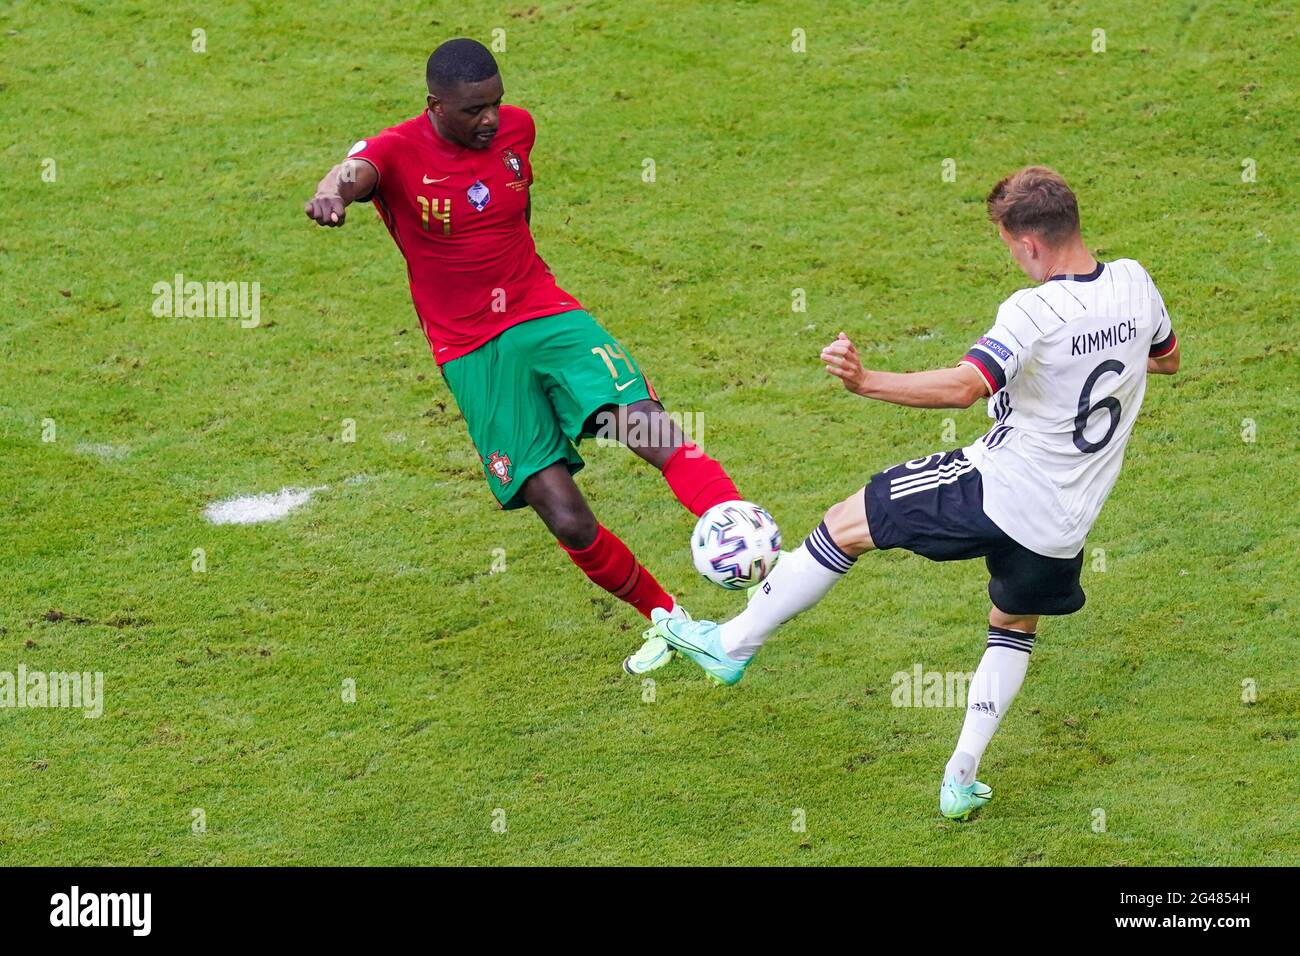 MUNCHEN, GERMANY - JUNE 19: William Carvalho of Portugal battles for possession with Joshua Kimmich of Germany during the UEFA Euro 2020 Group F match between Portugal and Germany at Allianz Arena on June 19, 2021 in Munchen, Germany (Photo by Andre Weening/Orange Pictures) Stock Photo